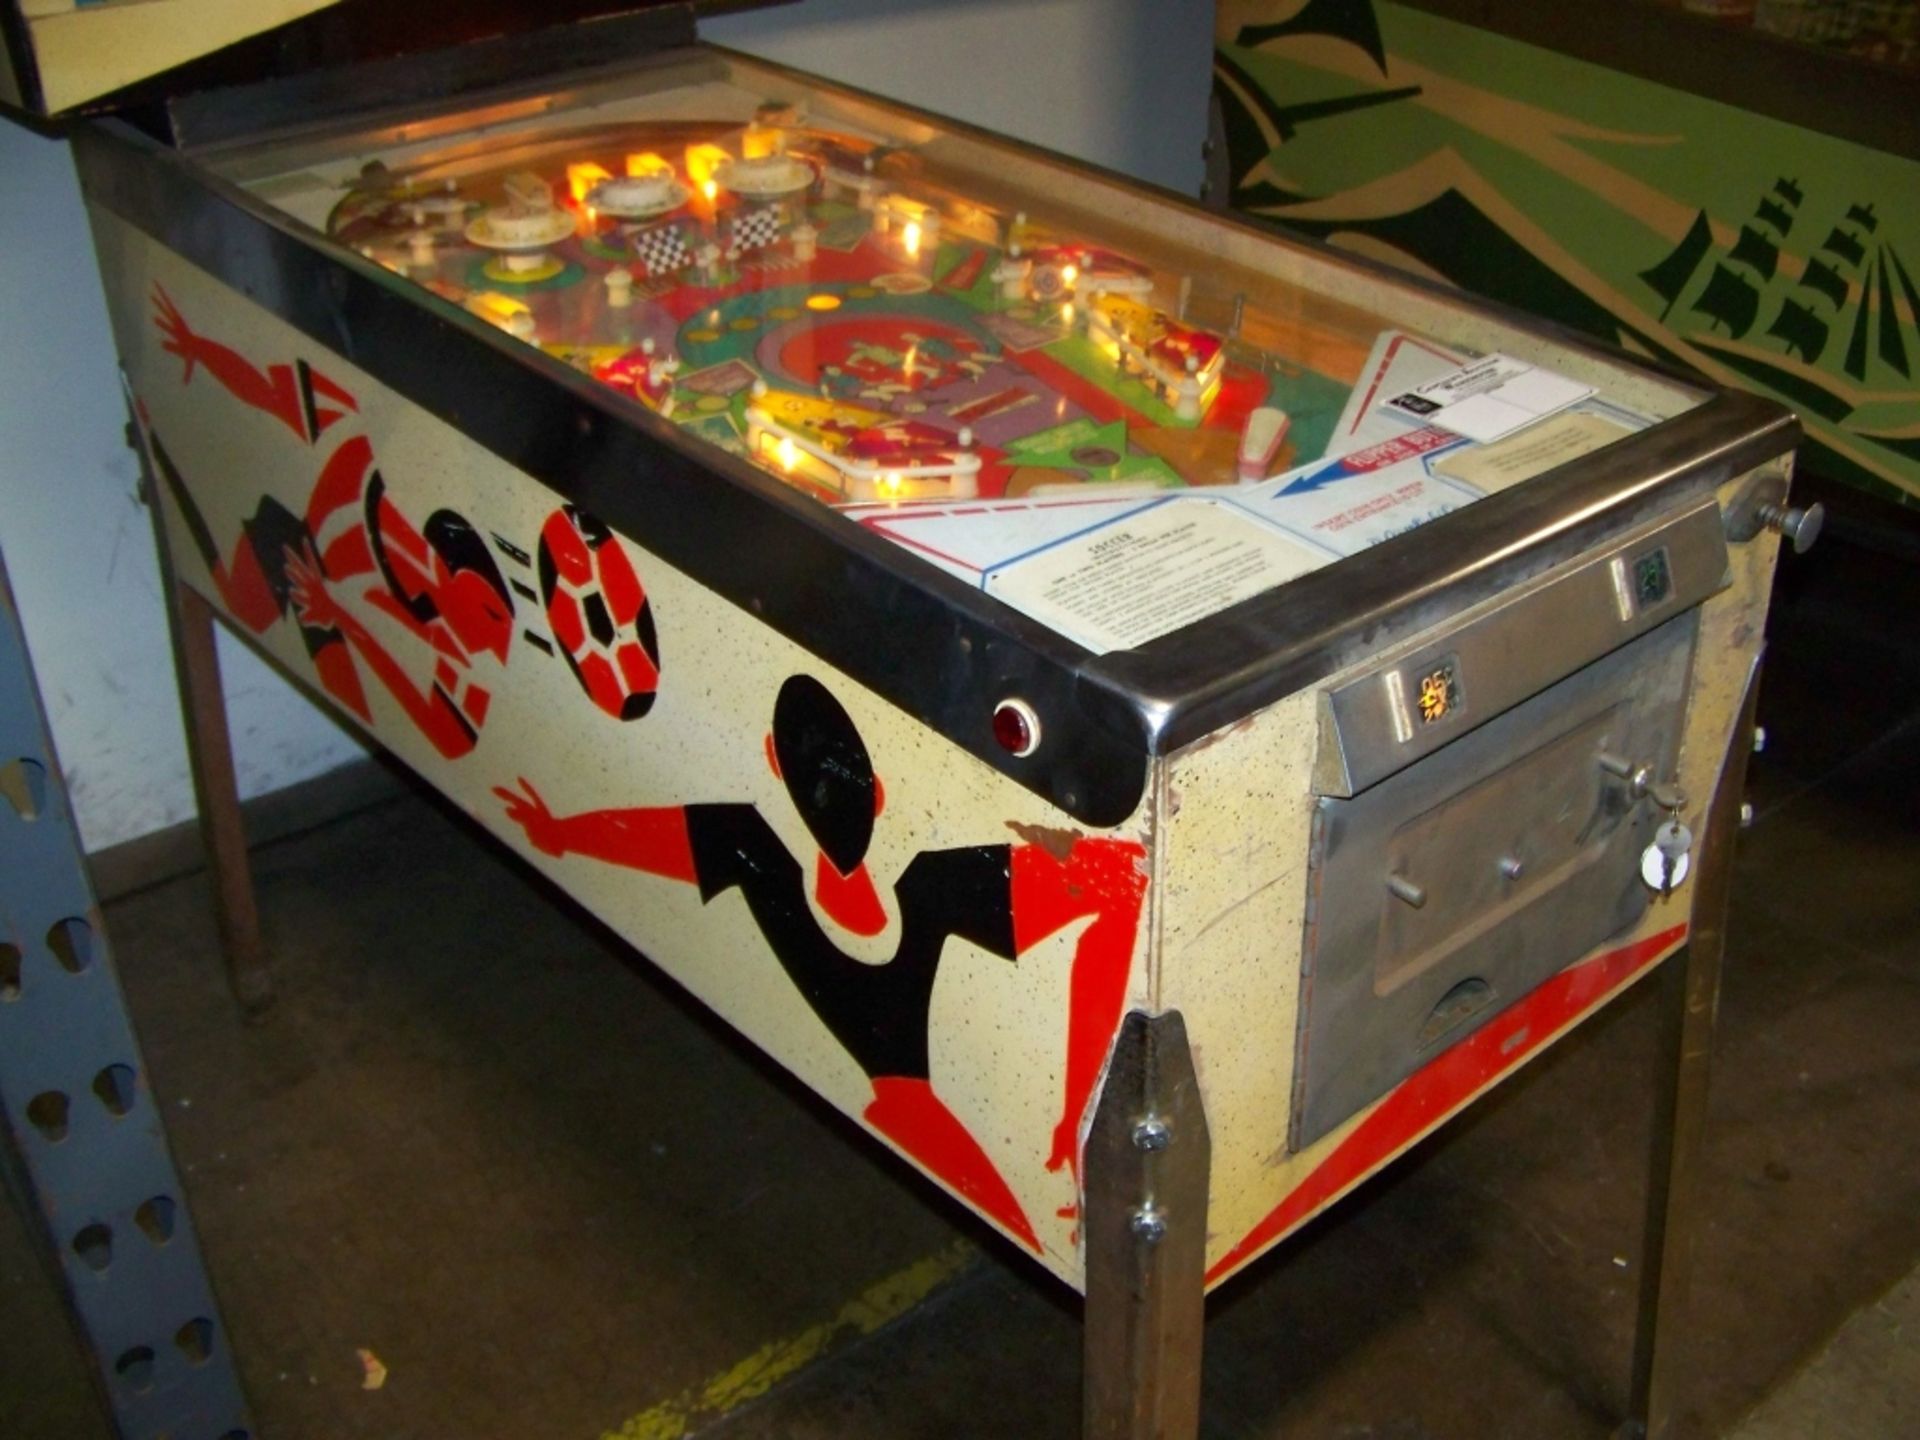 SOCCER PINBALL MACHINE ANIMATED BOX GOTTLIEB 1975 Item is in used condition. Evidence of wear and - Image 5 of 8